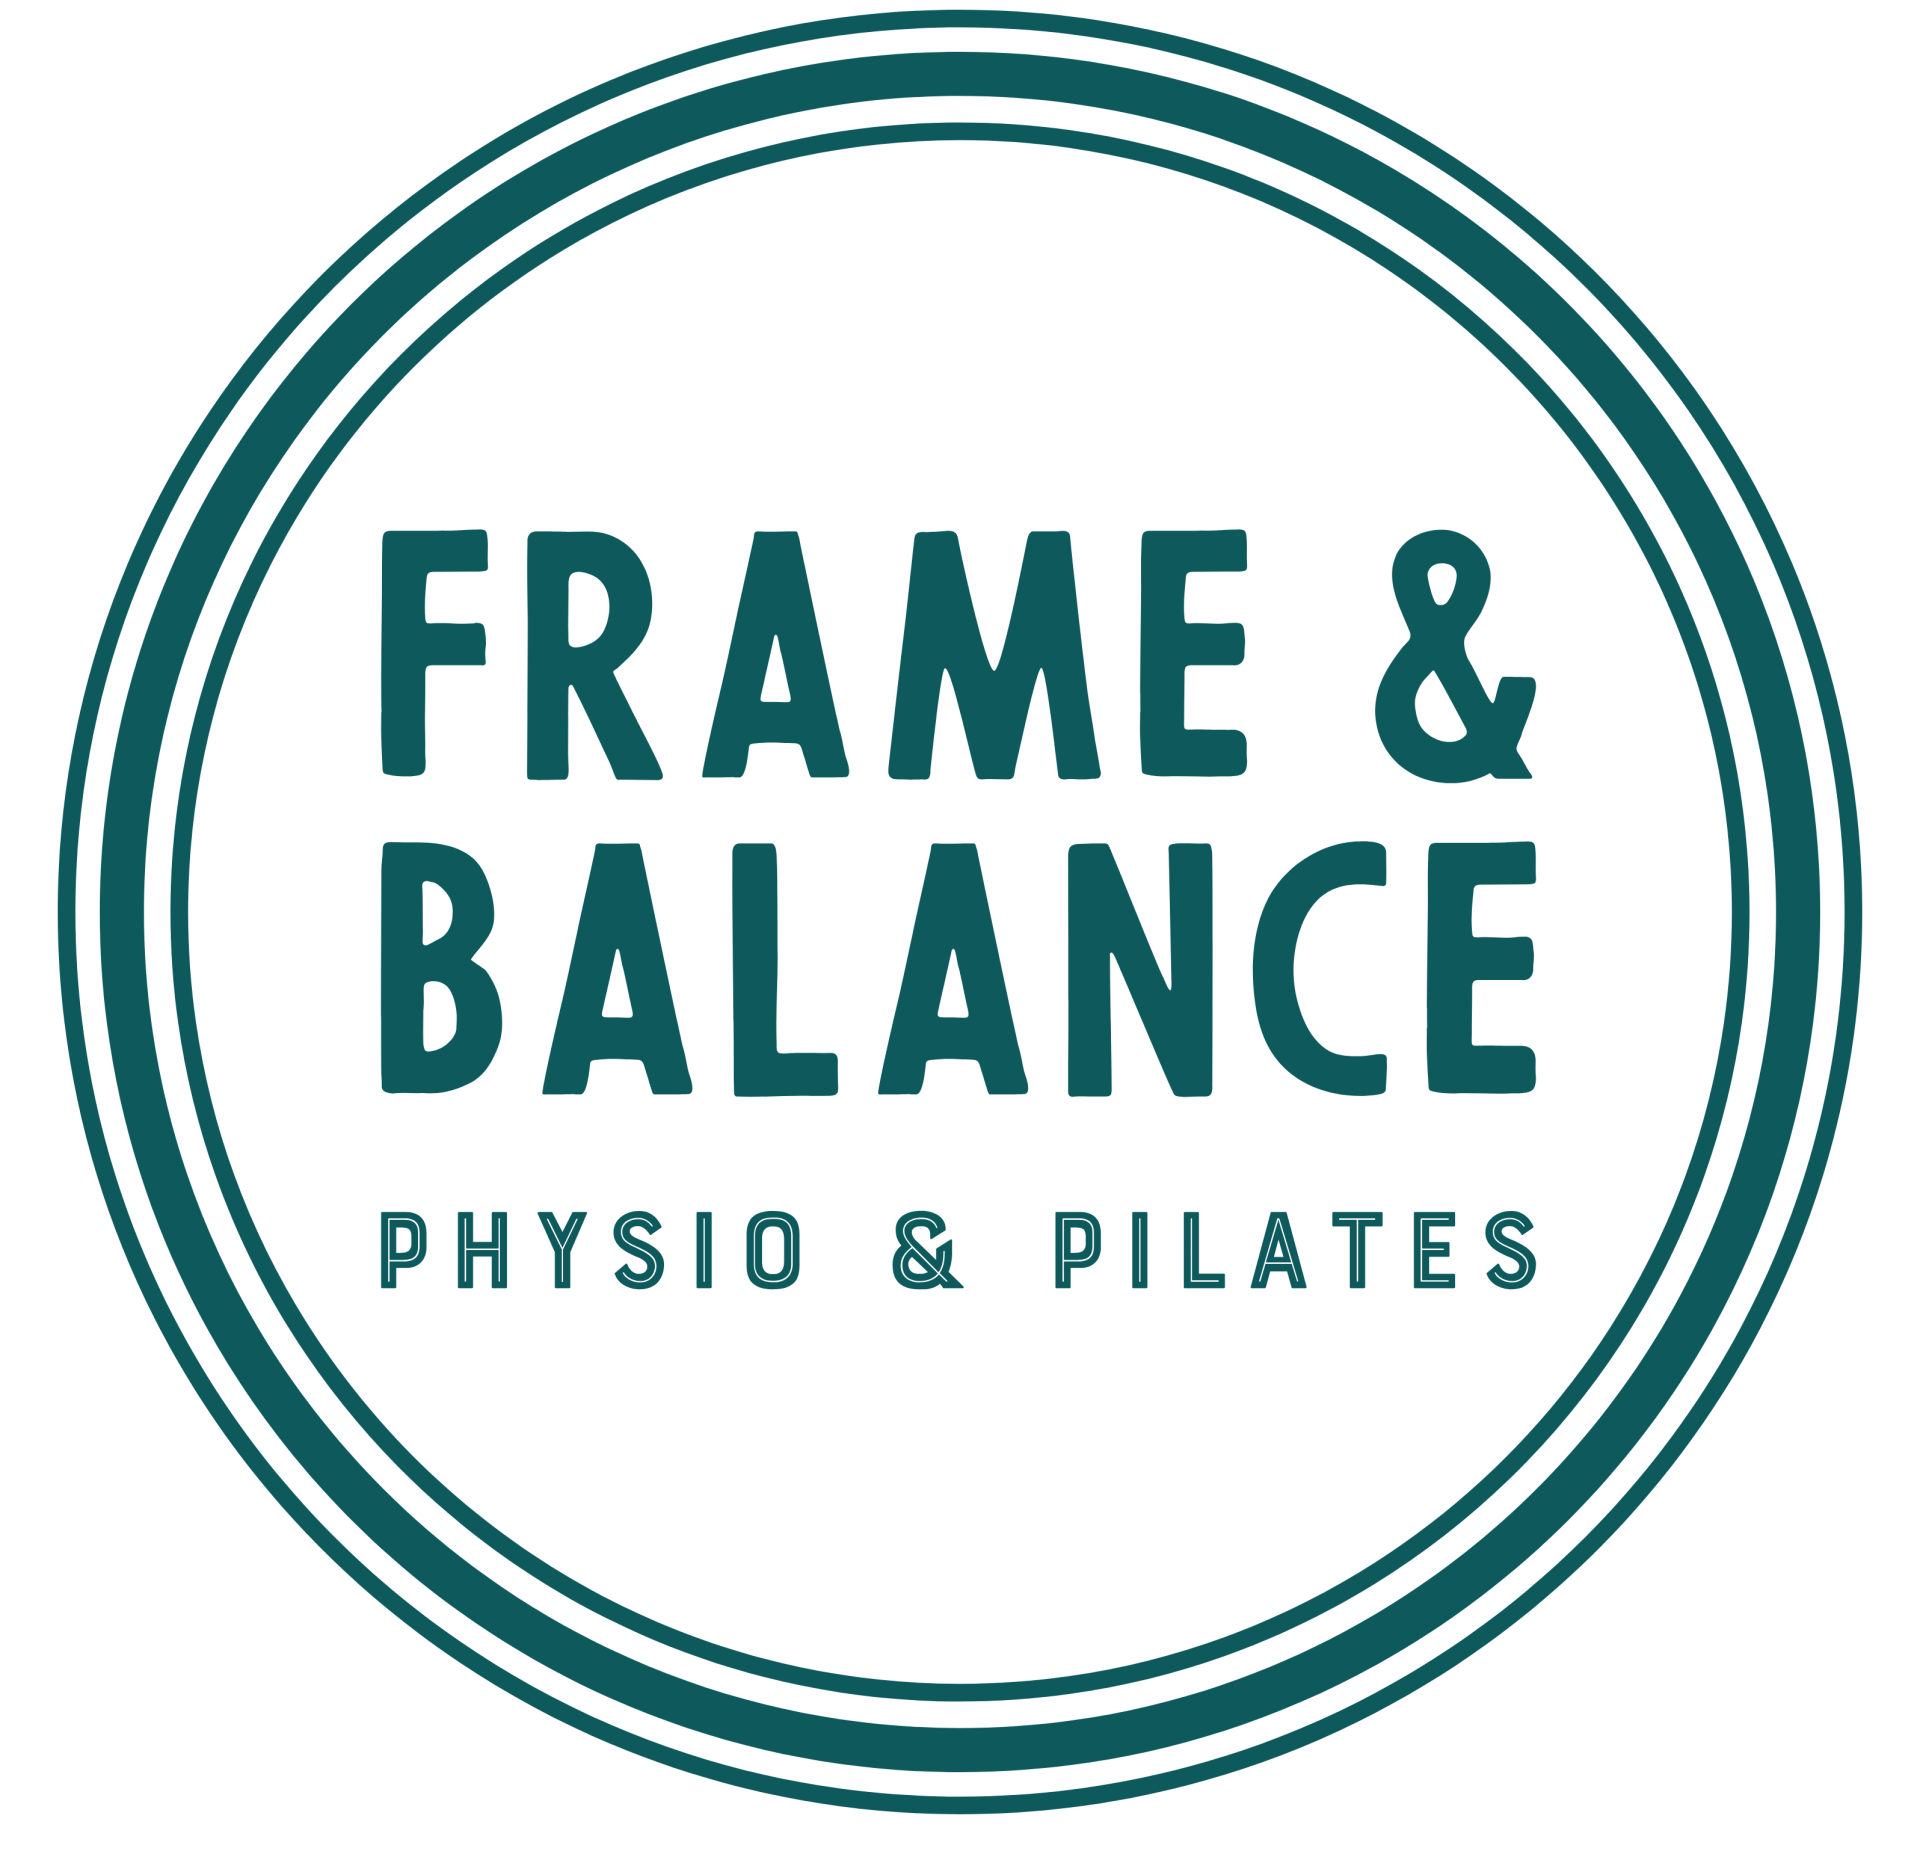 The Pilates Circle is one of the most well known and versatile Pilates props  ⭕️ It can be used to introduce instability, resistance